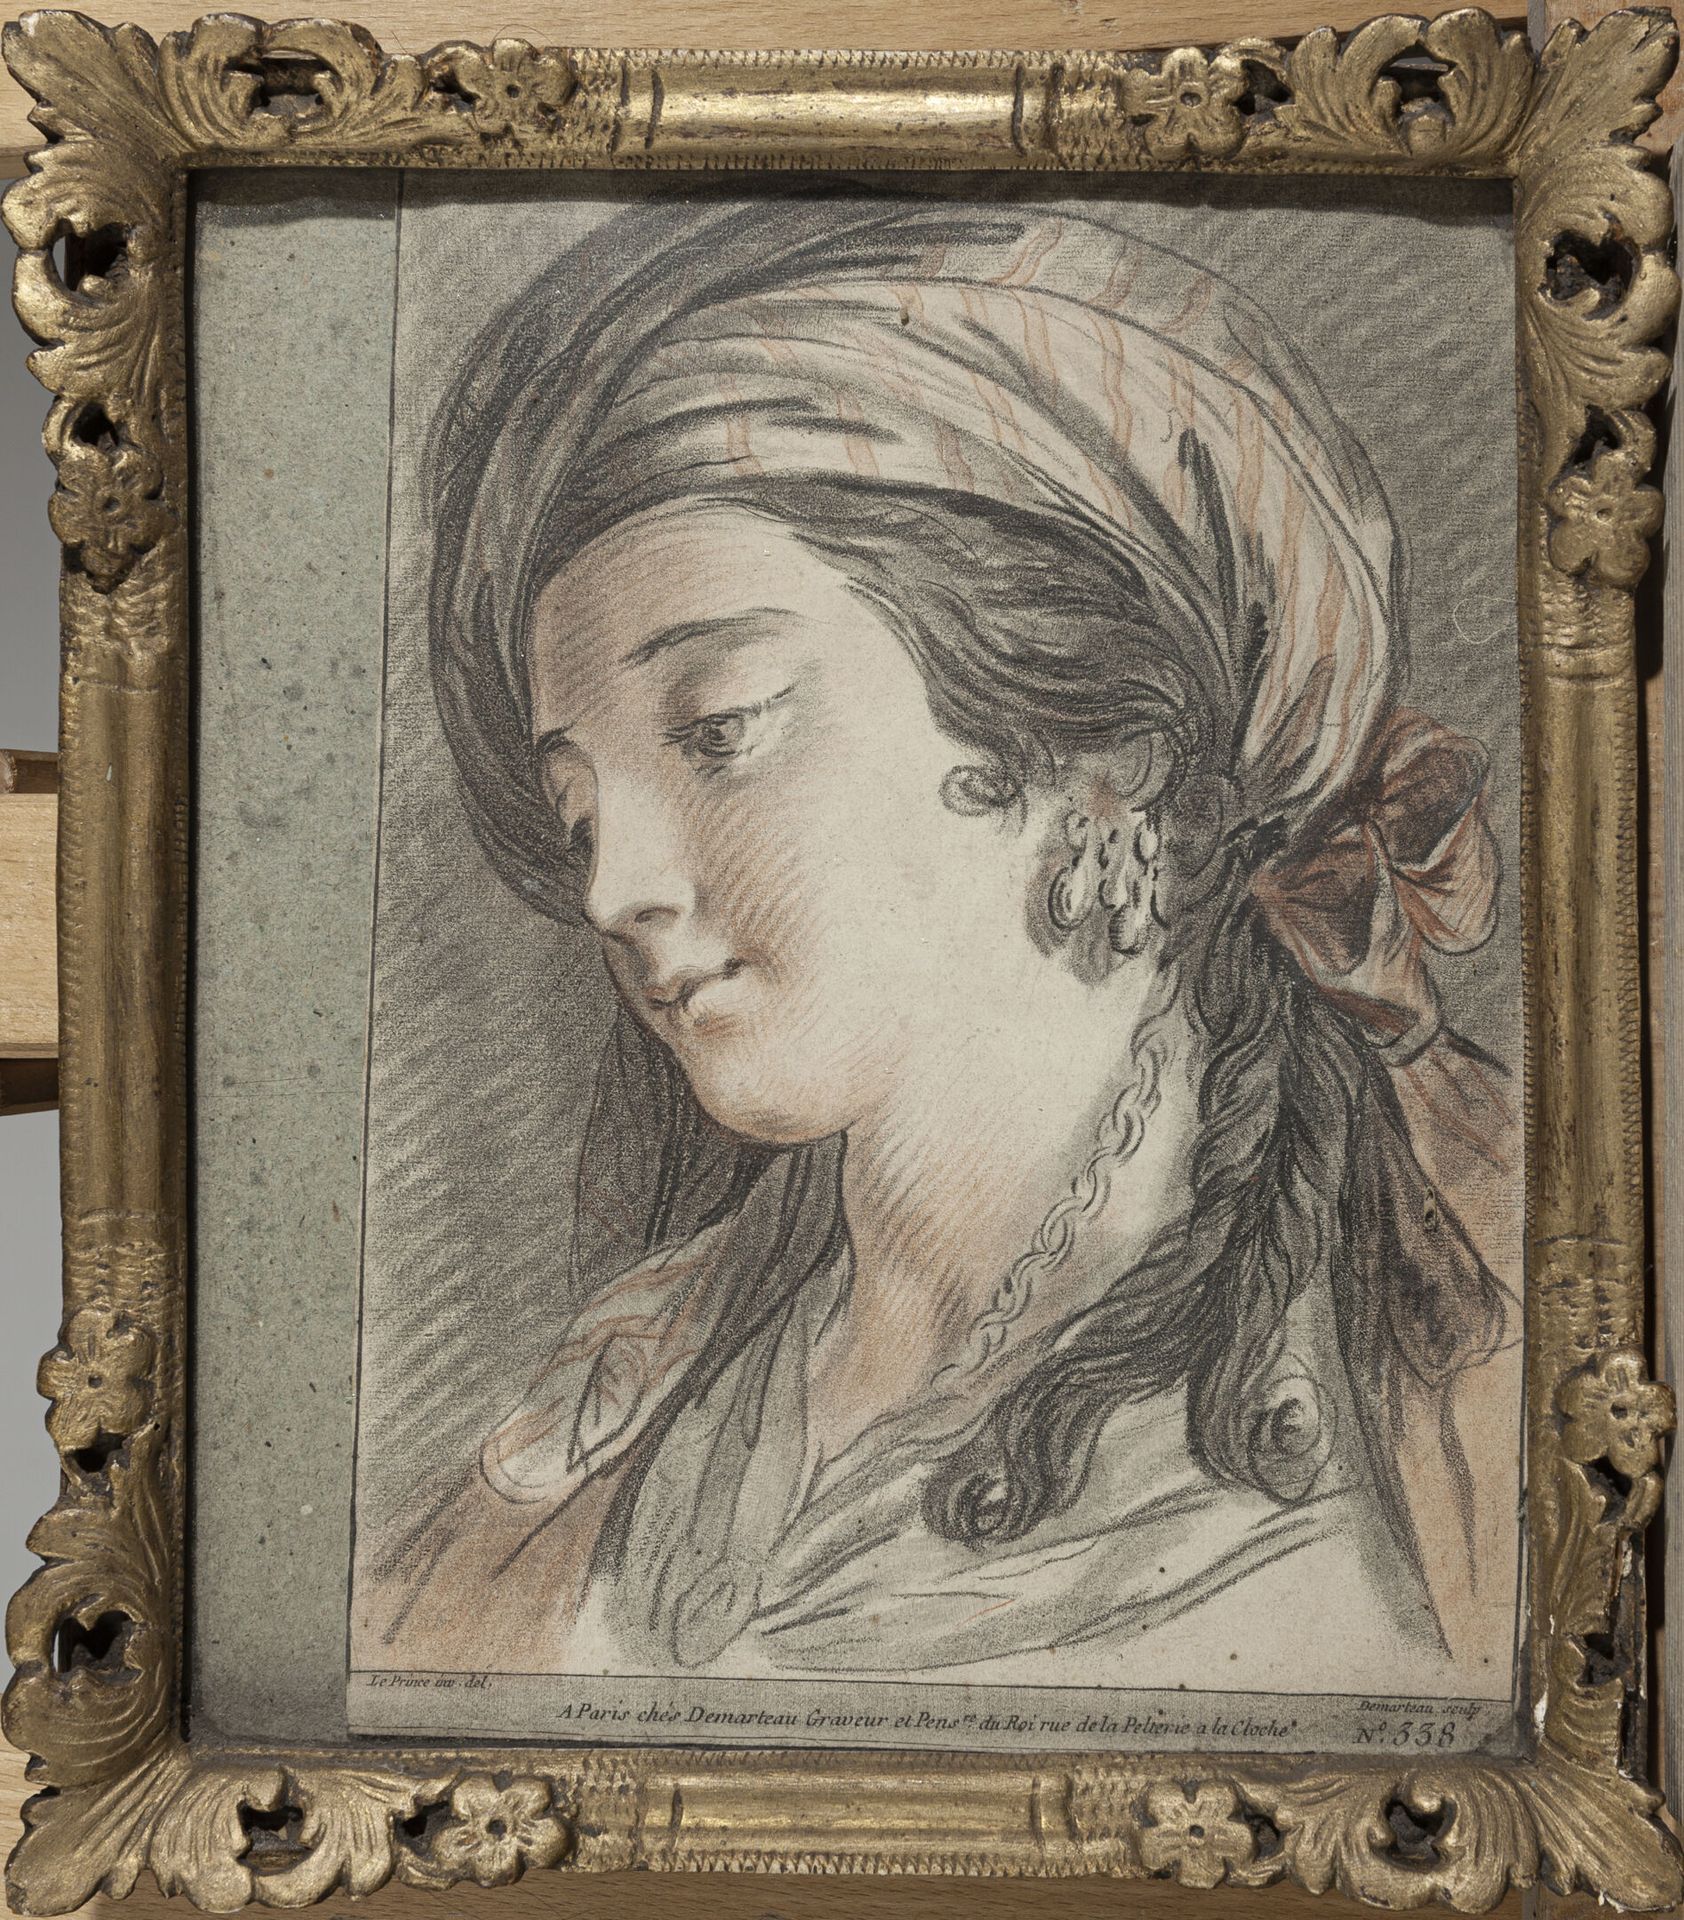 Null Gilles DEMARTEAU (1722-1776)

Profile of a woman with a turban

Engraving i&hellip;